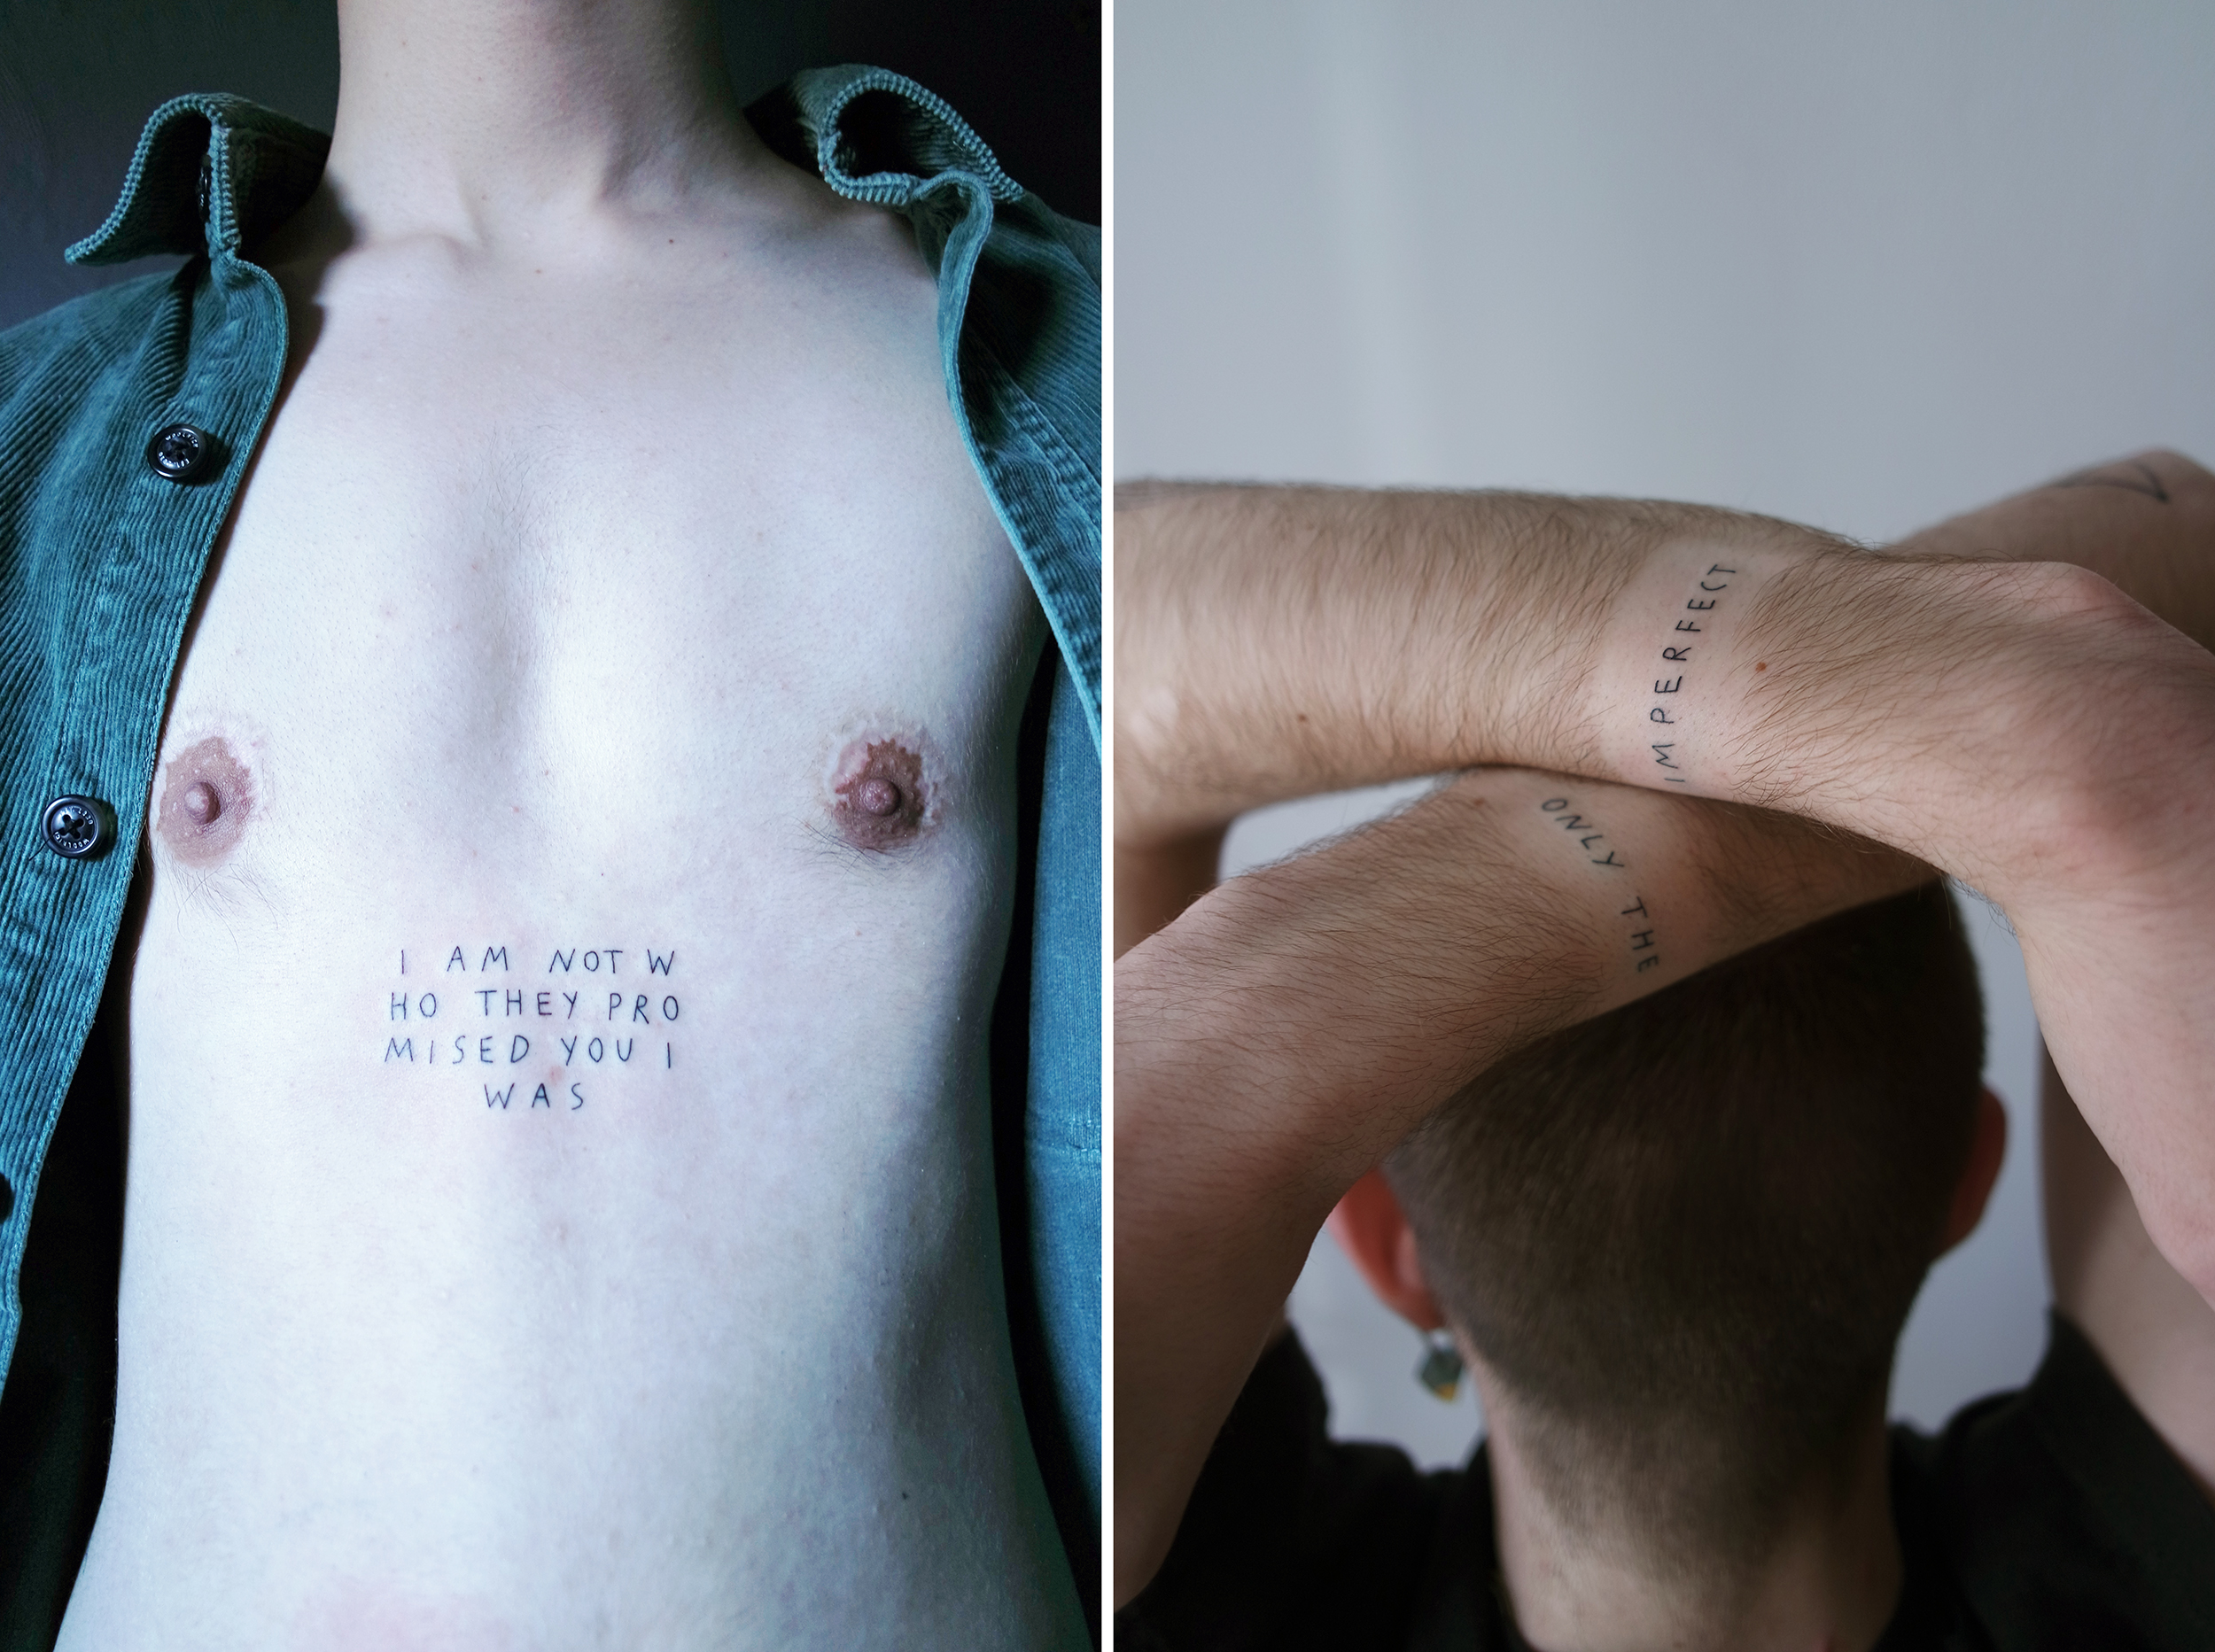 Tattoo Artists Share Things to Never Do When Getting a Small Tattoo